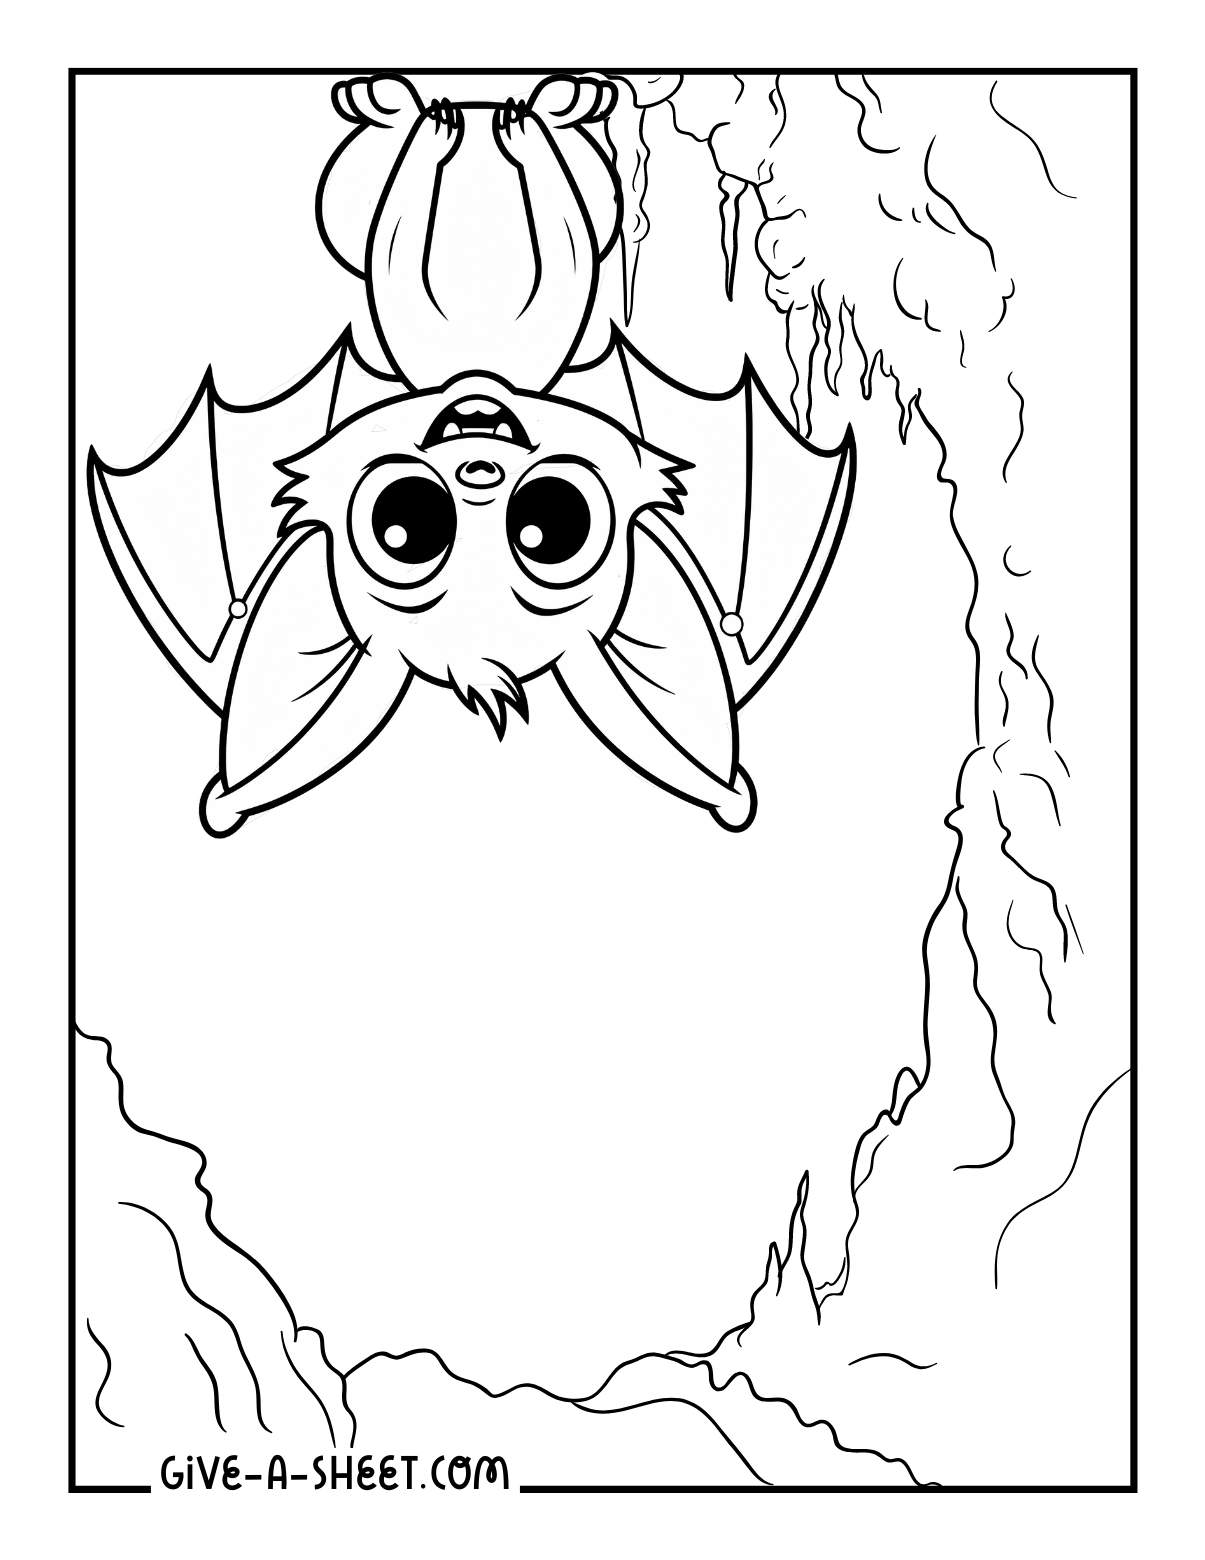 Friendly bats inside a cave coloring page.